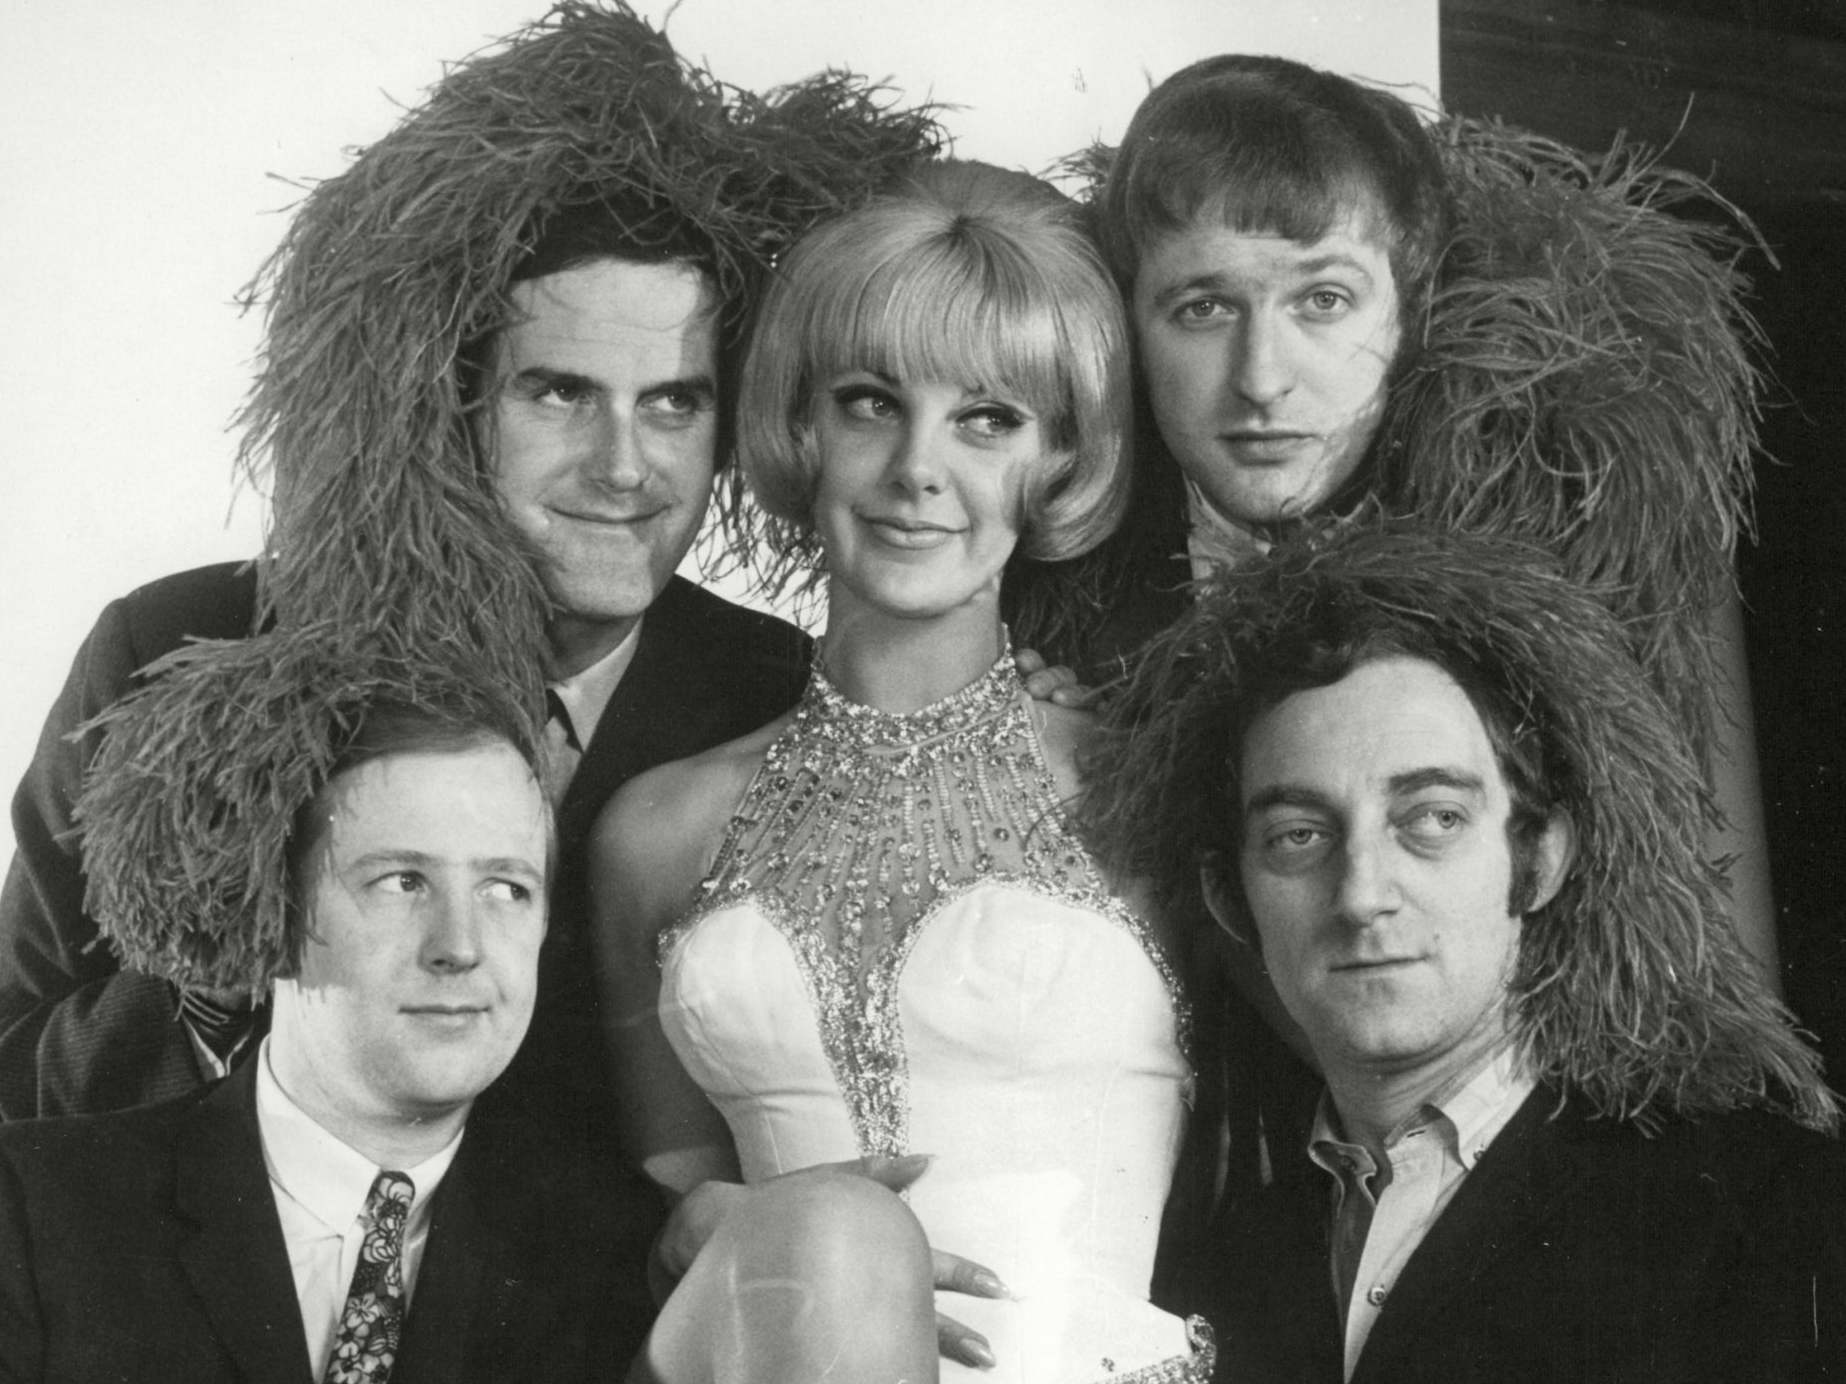 The cast of ‘At Last the 1948 Show’, clockwise from top left: John Cleese, Aimi MacDonald, Graham Chapman, Marty Feldman and Brooke-Taylor